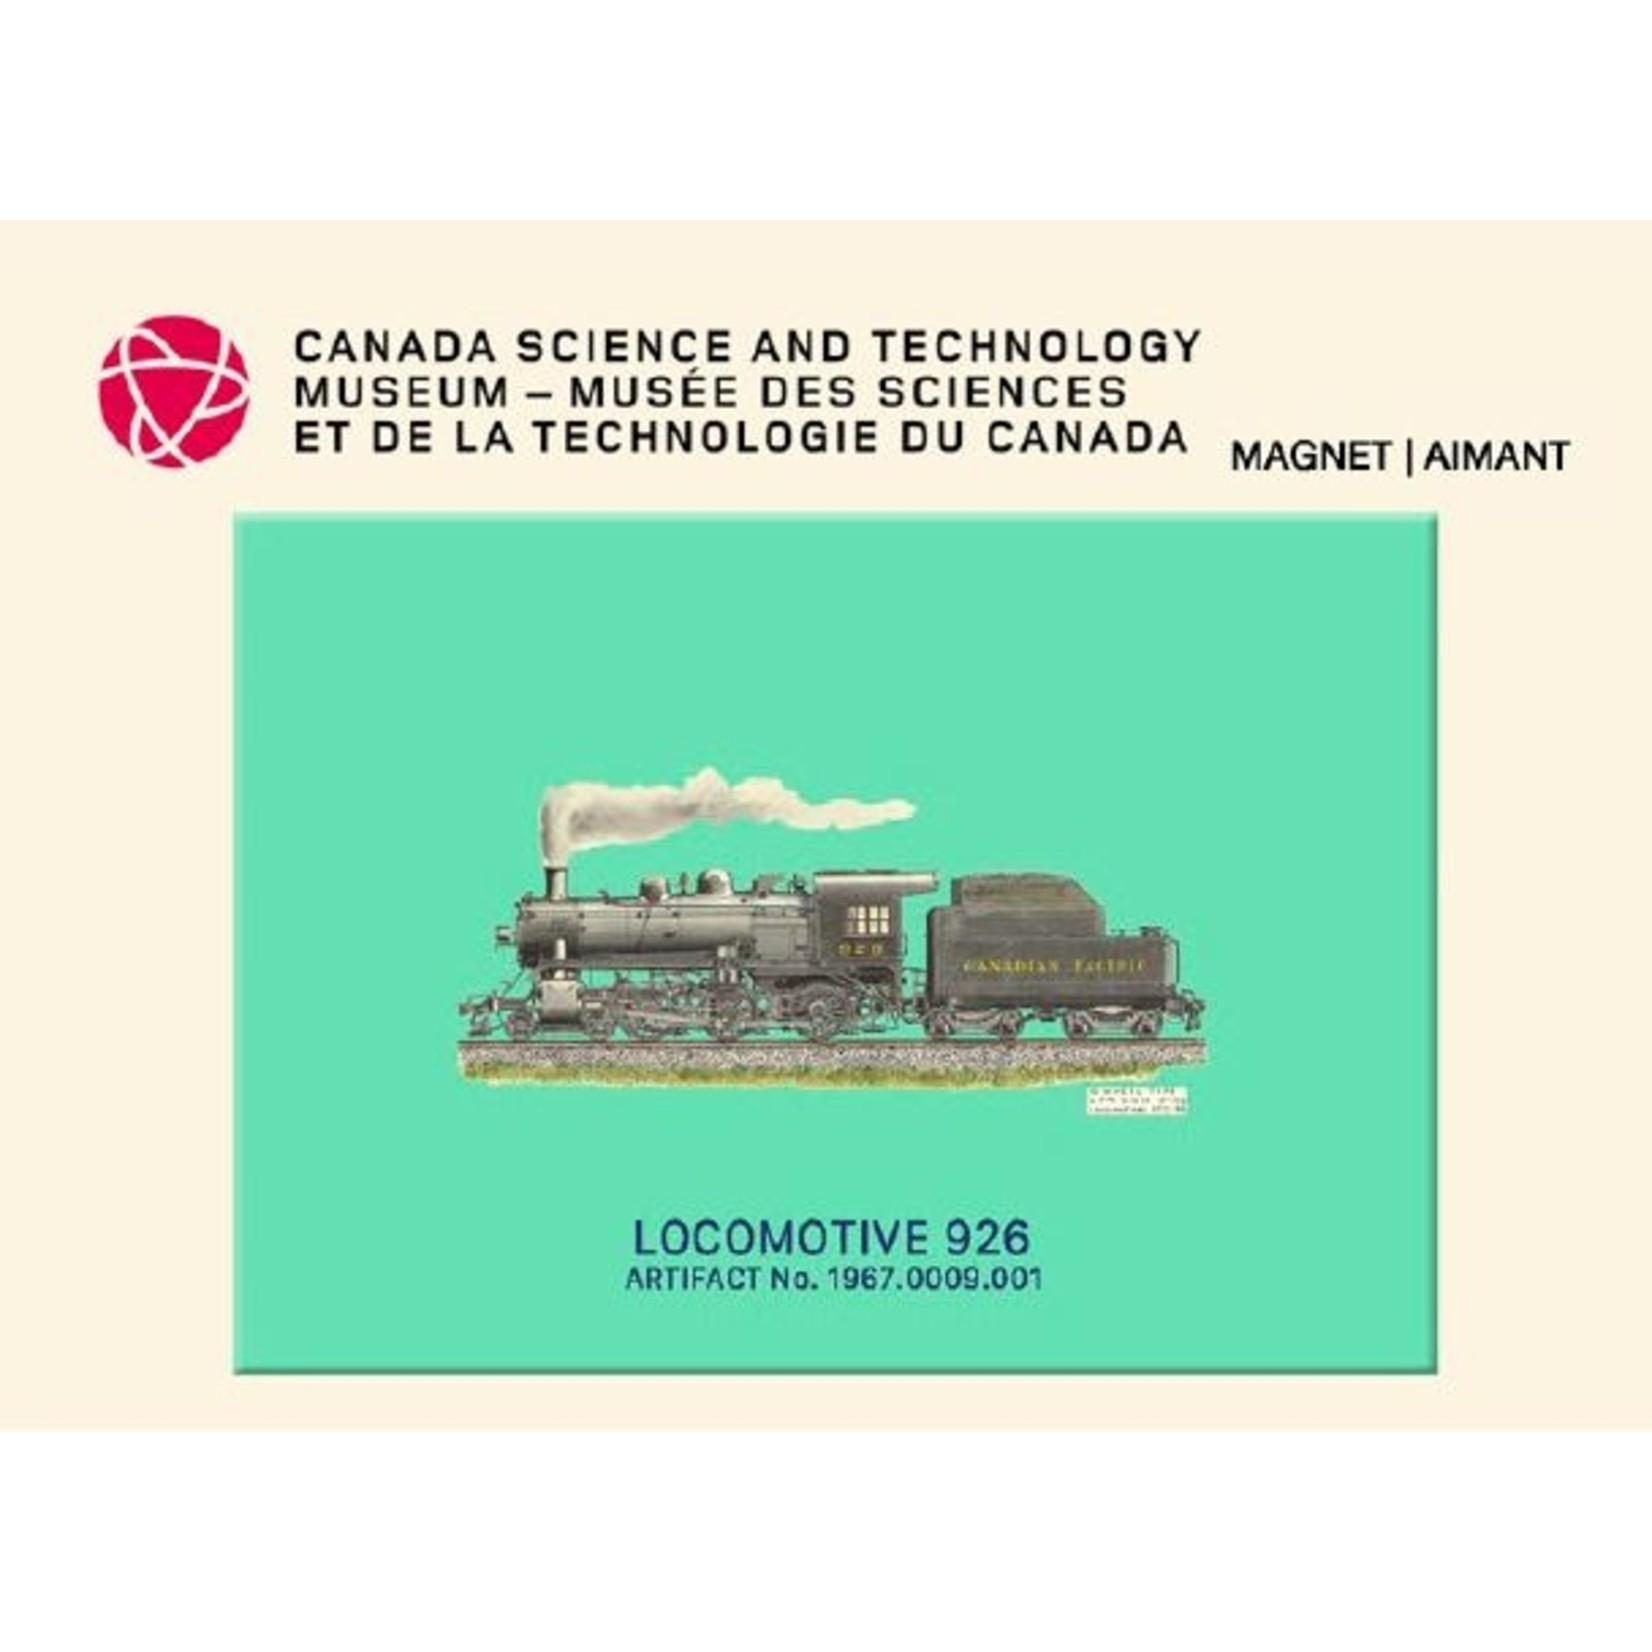 Science and Technology Locomotive 926 Magnet